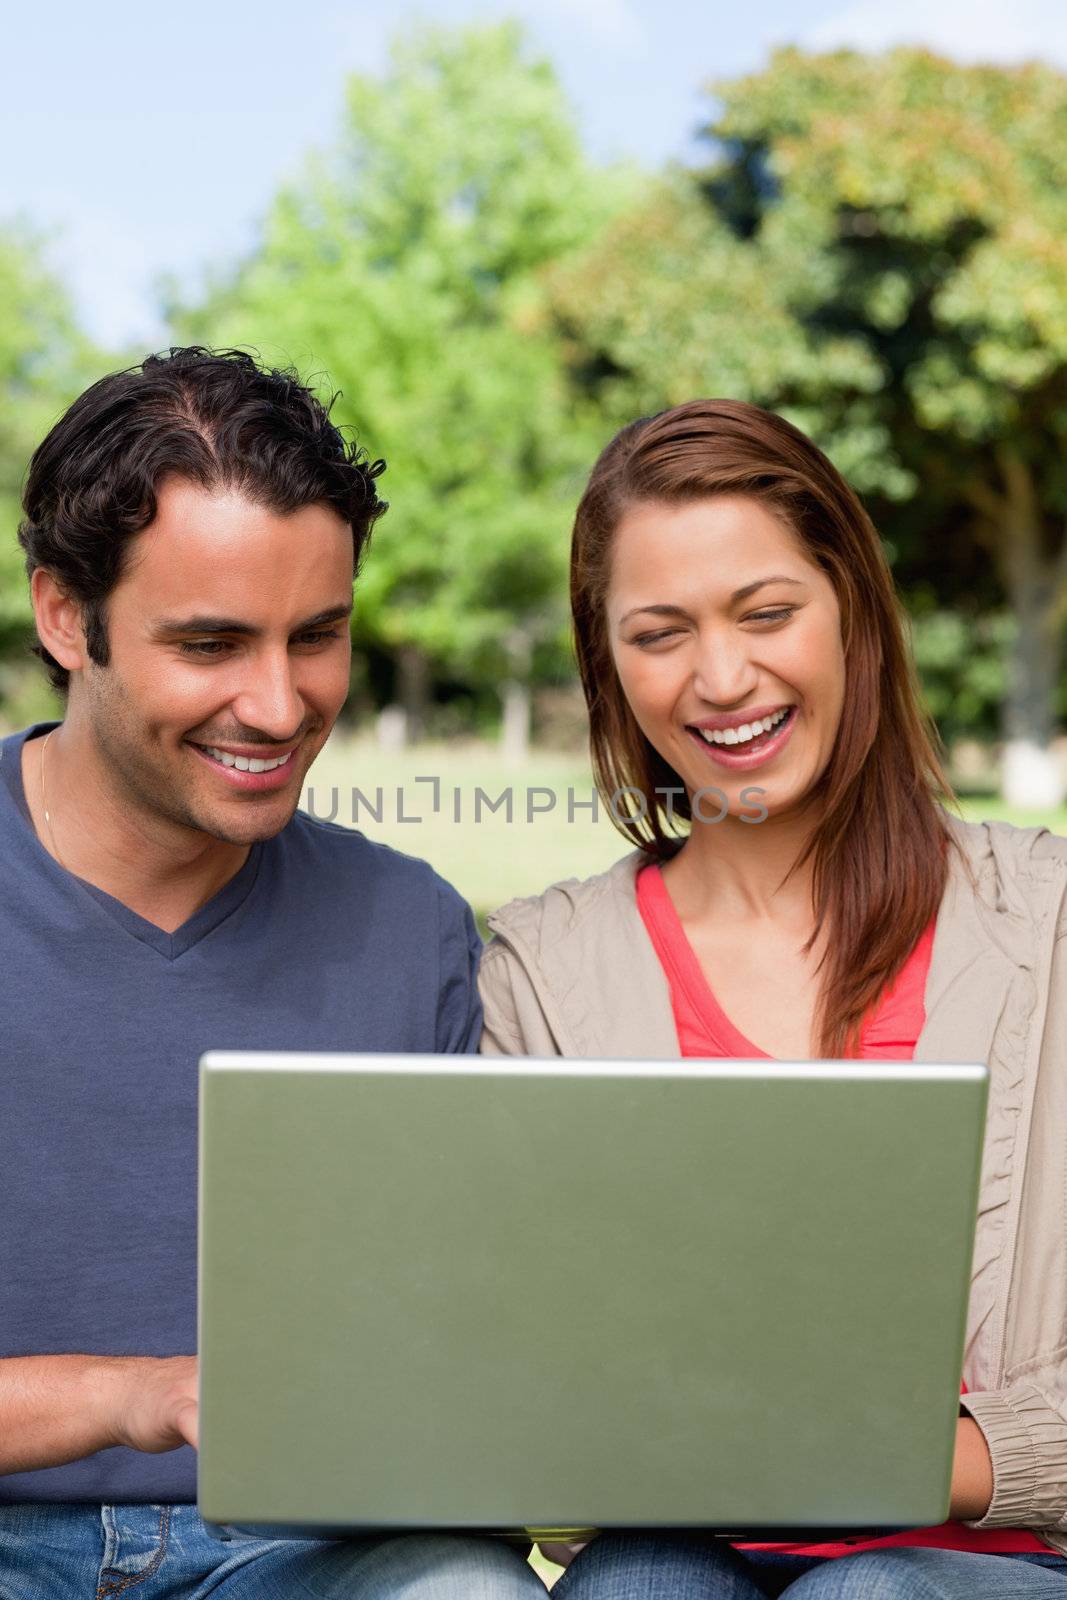 Two friends laughing as they watch something on a tablet while sitting together in a bright area surrounded by trees